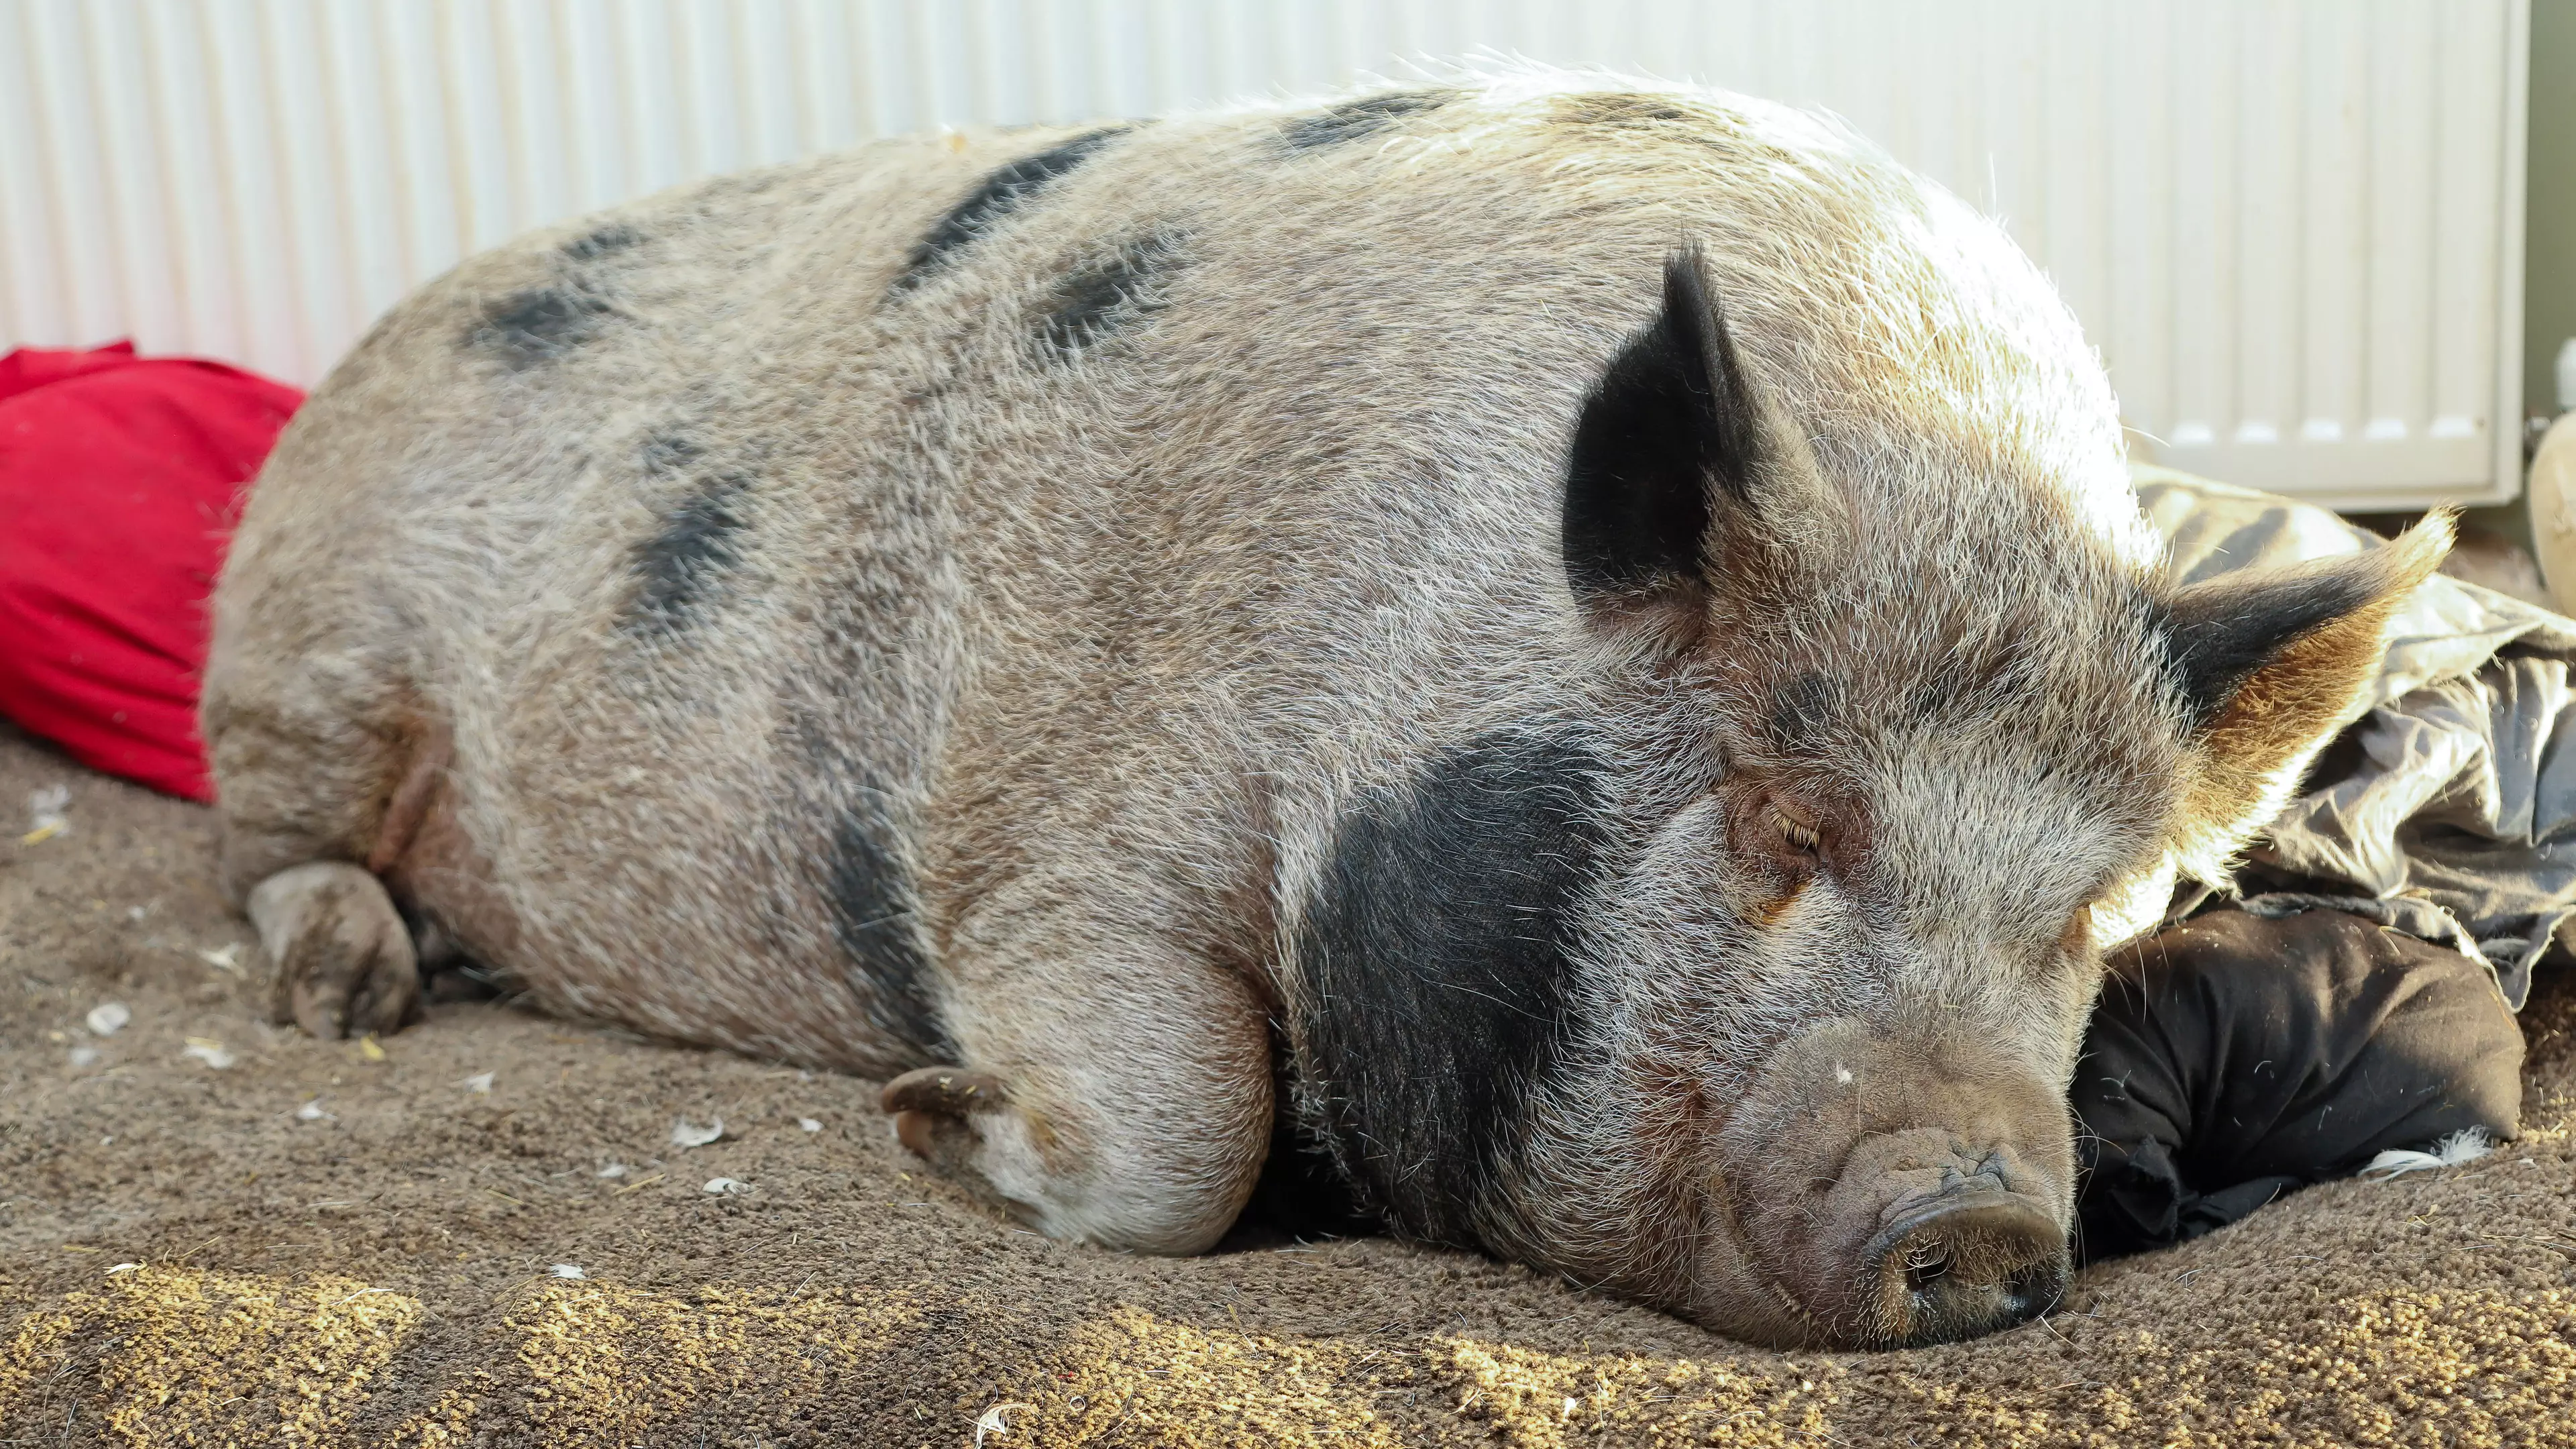 Couple's Home Taken Over By 28 Stone Pig They Thought Was Micro-Animal